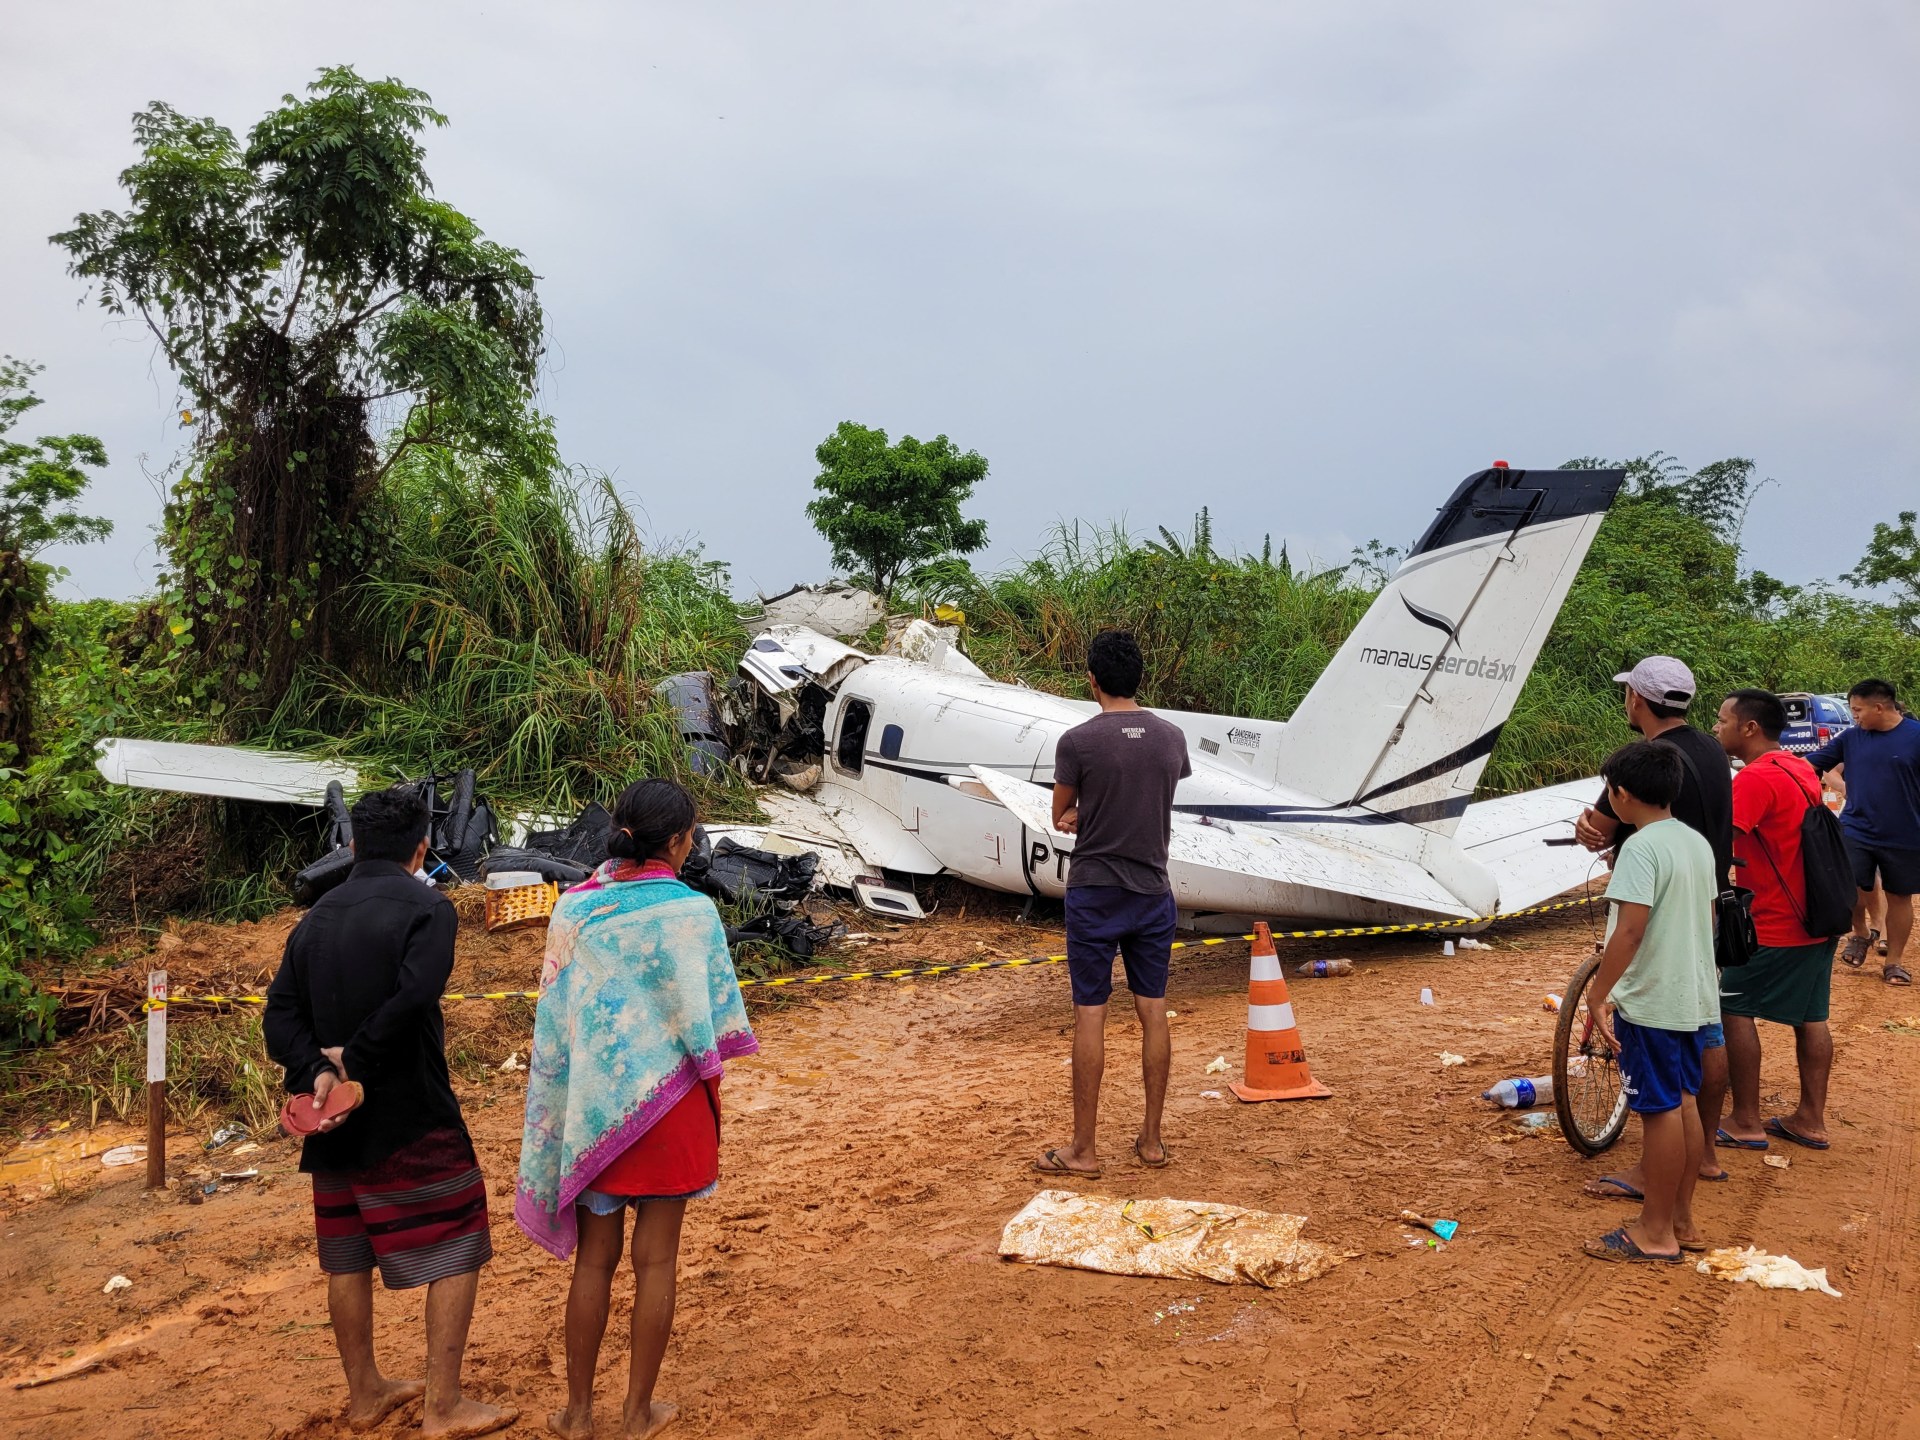 Twelve killed in second plane crash in less than two months in Brazil